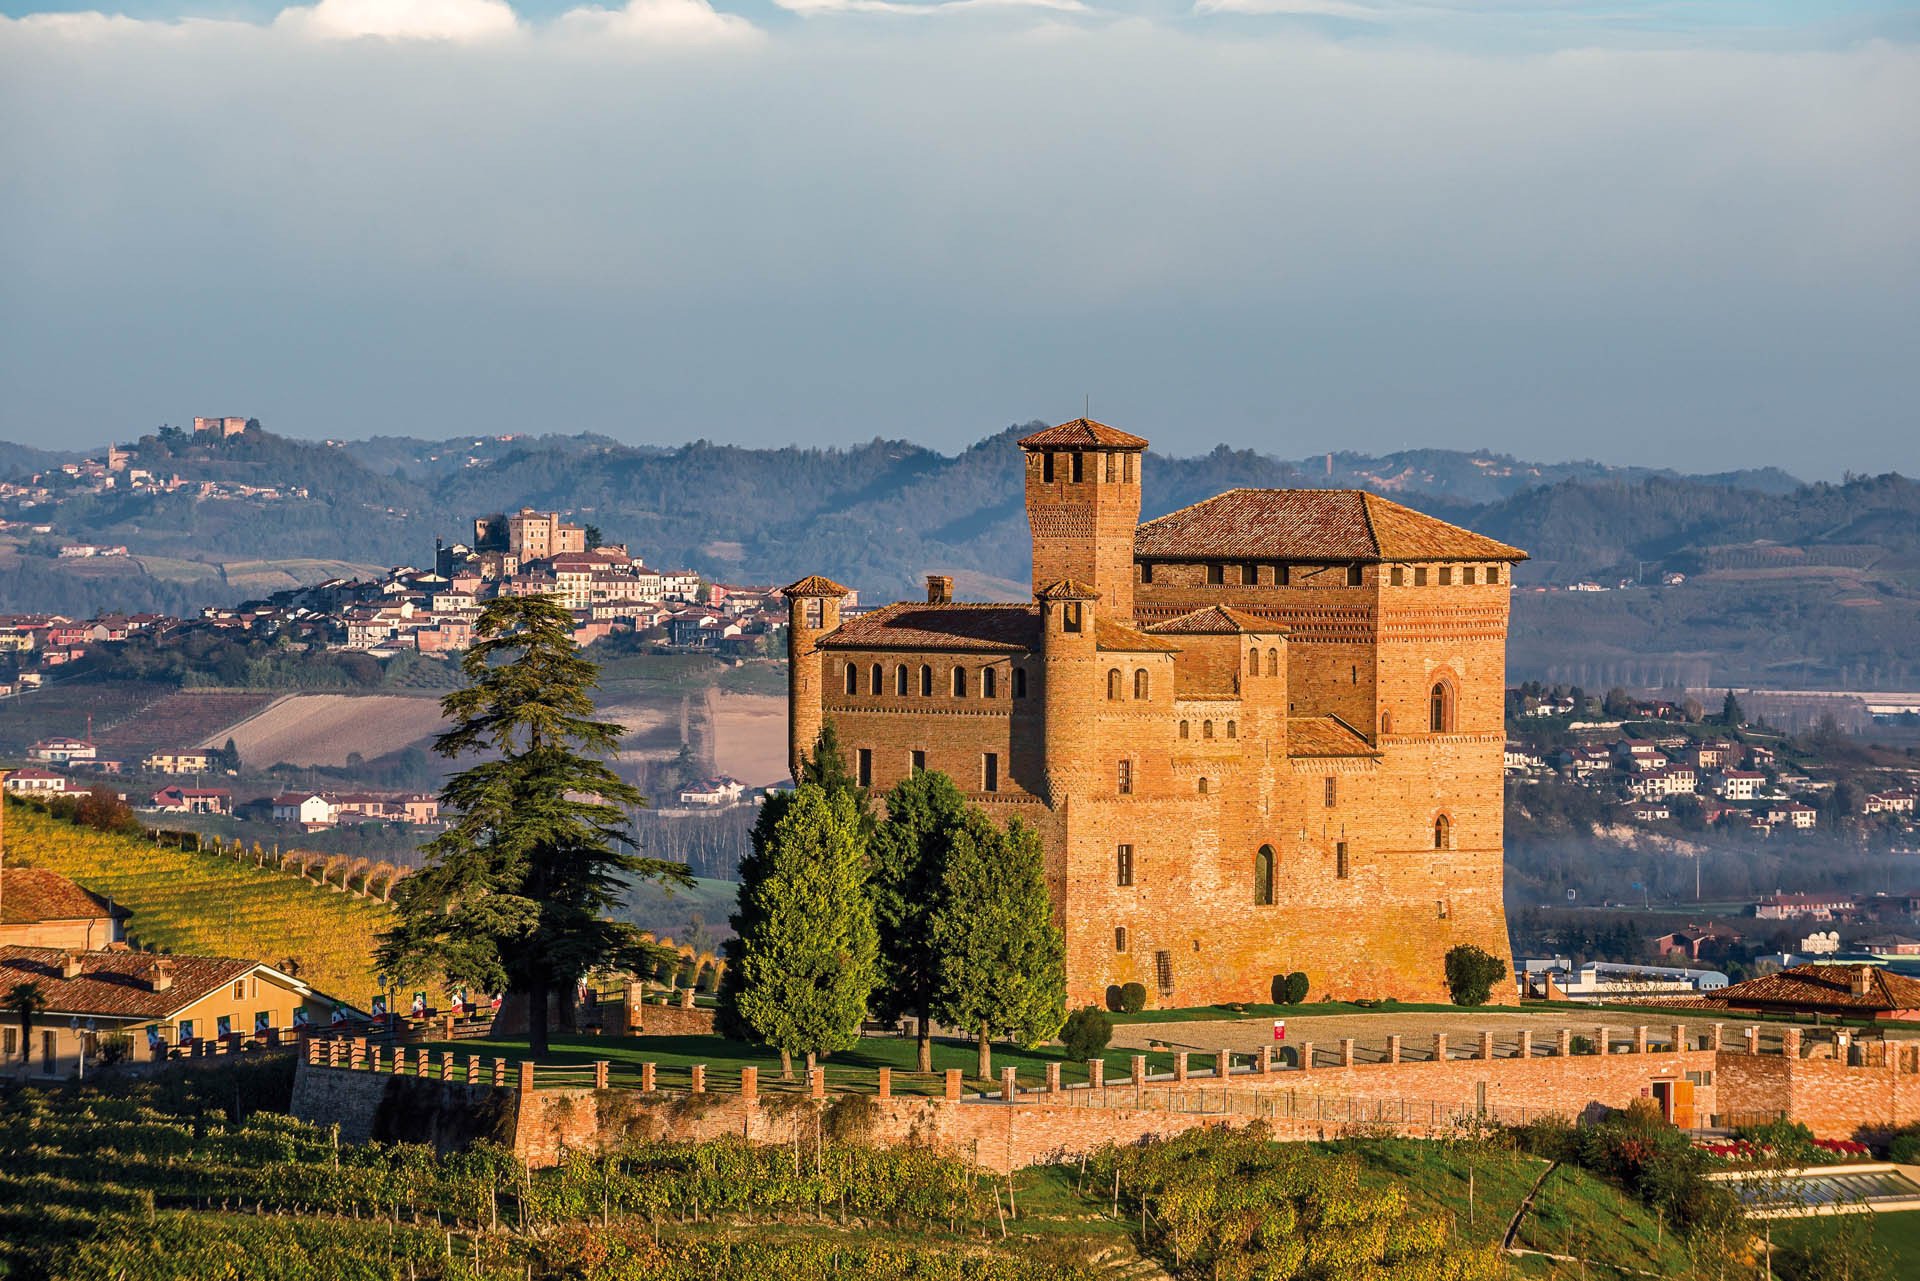 The castle of Grinzane Cavour, Piedmont, Italy